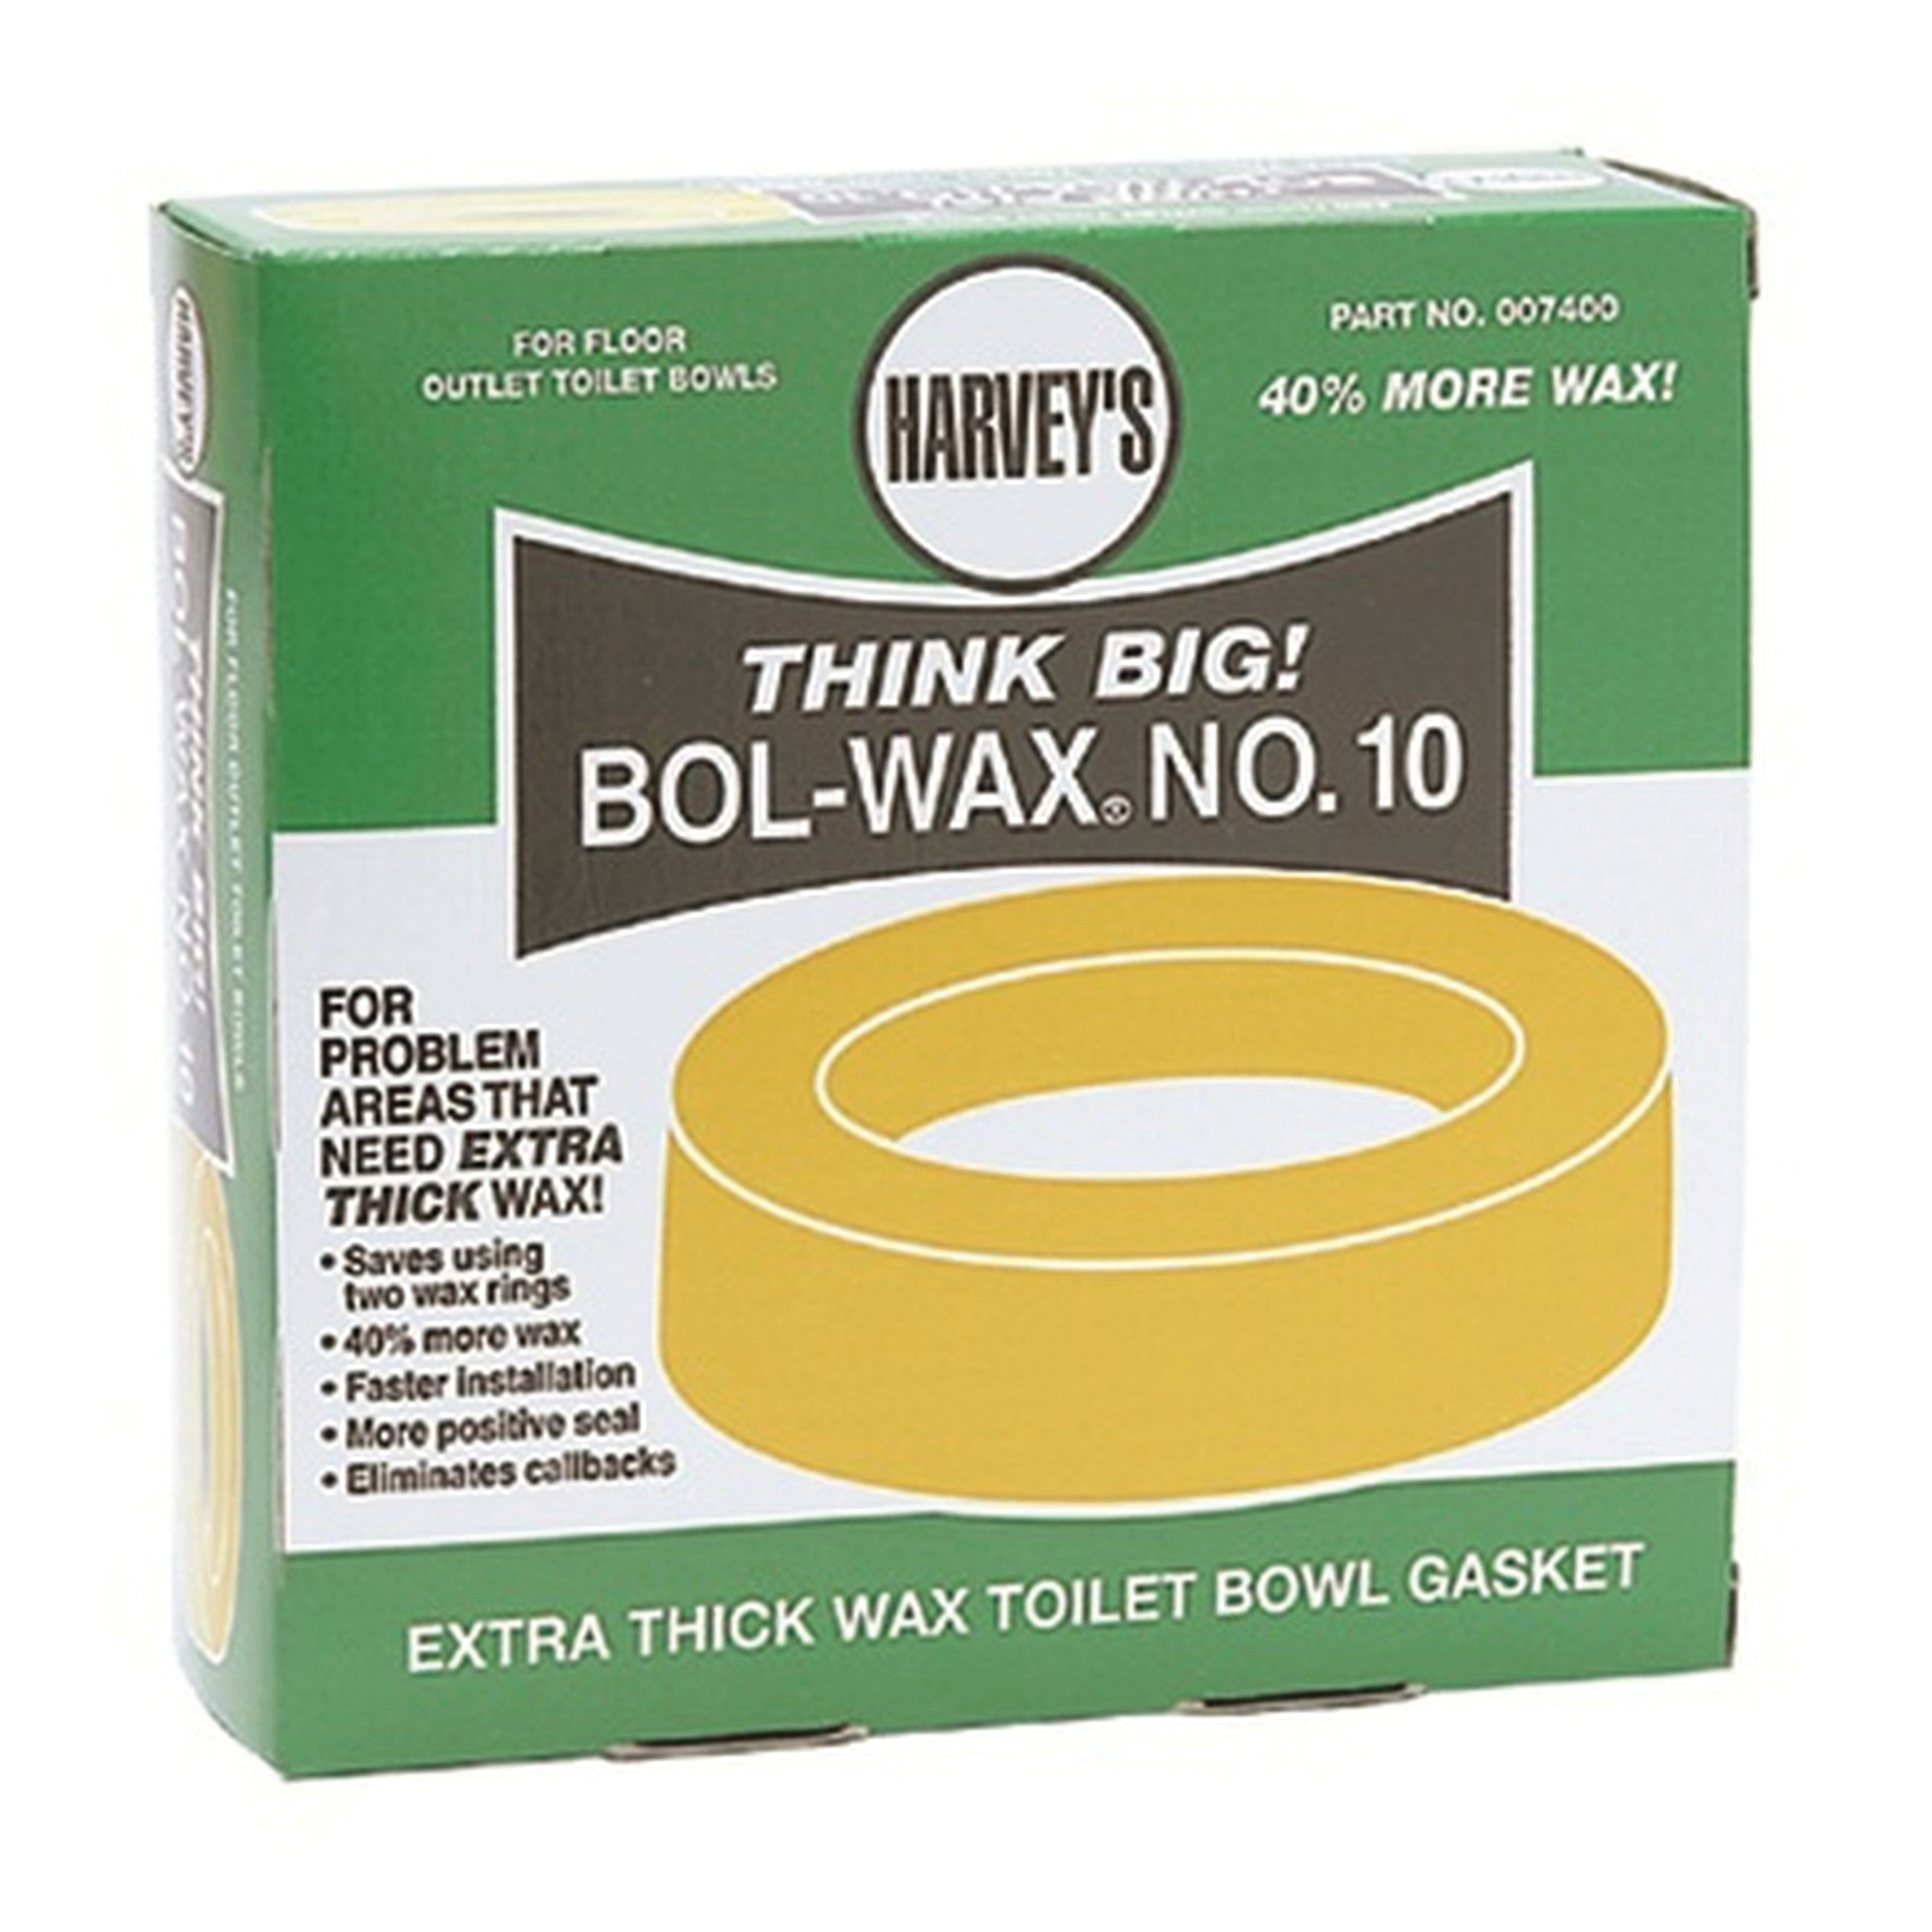 Harvey® 007400 Bol-Wax® No. 10 Standard Extra-Thick Wax Gasket, For Use With Floor Closet Bowl